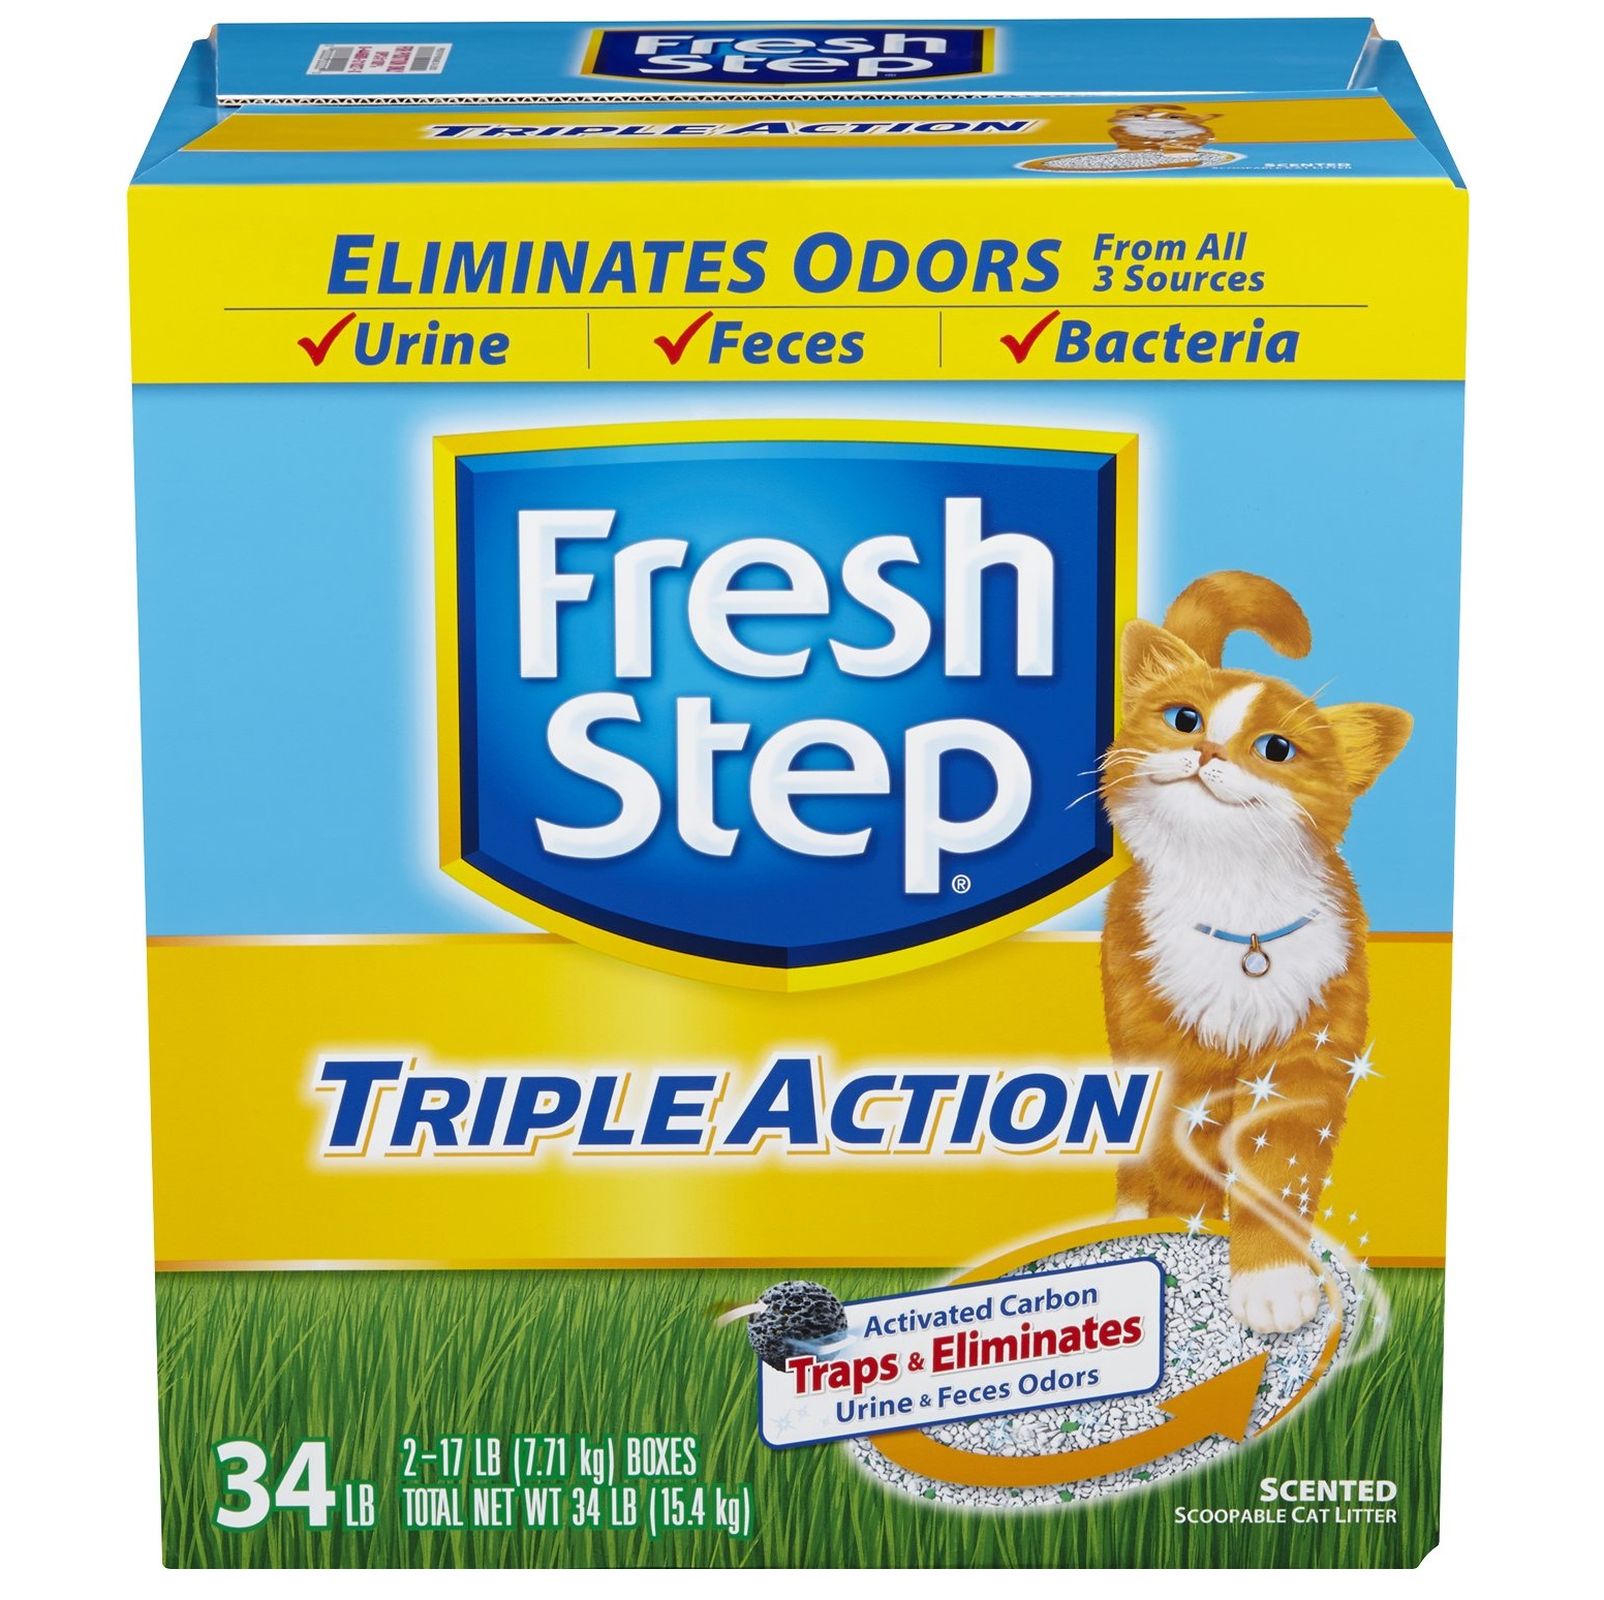 Fresh Step Triple Action Scoopable Scented Cat Litter 34 lbs. (2 - 17 lb. boxes)